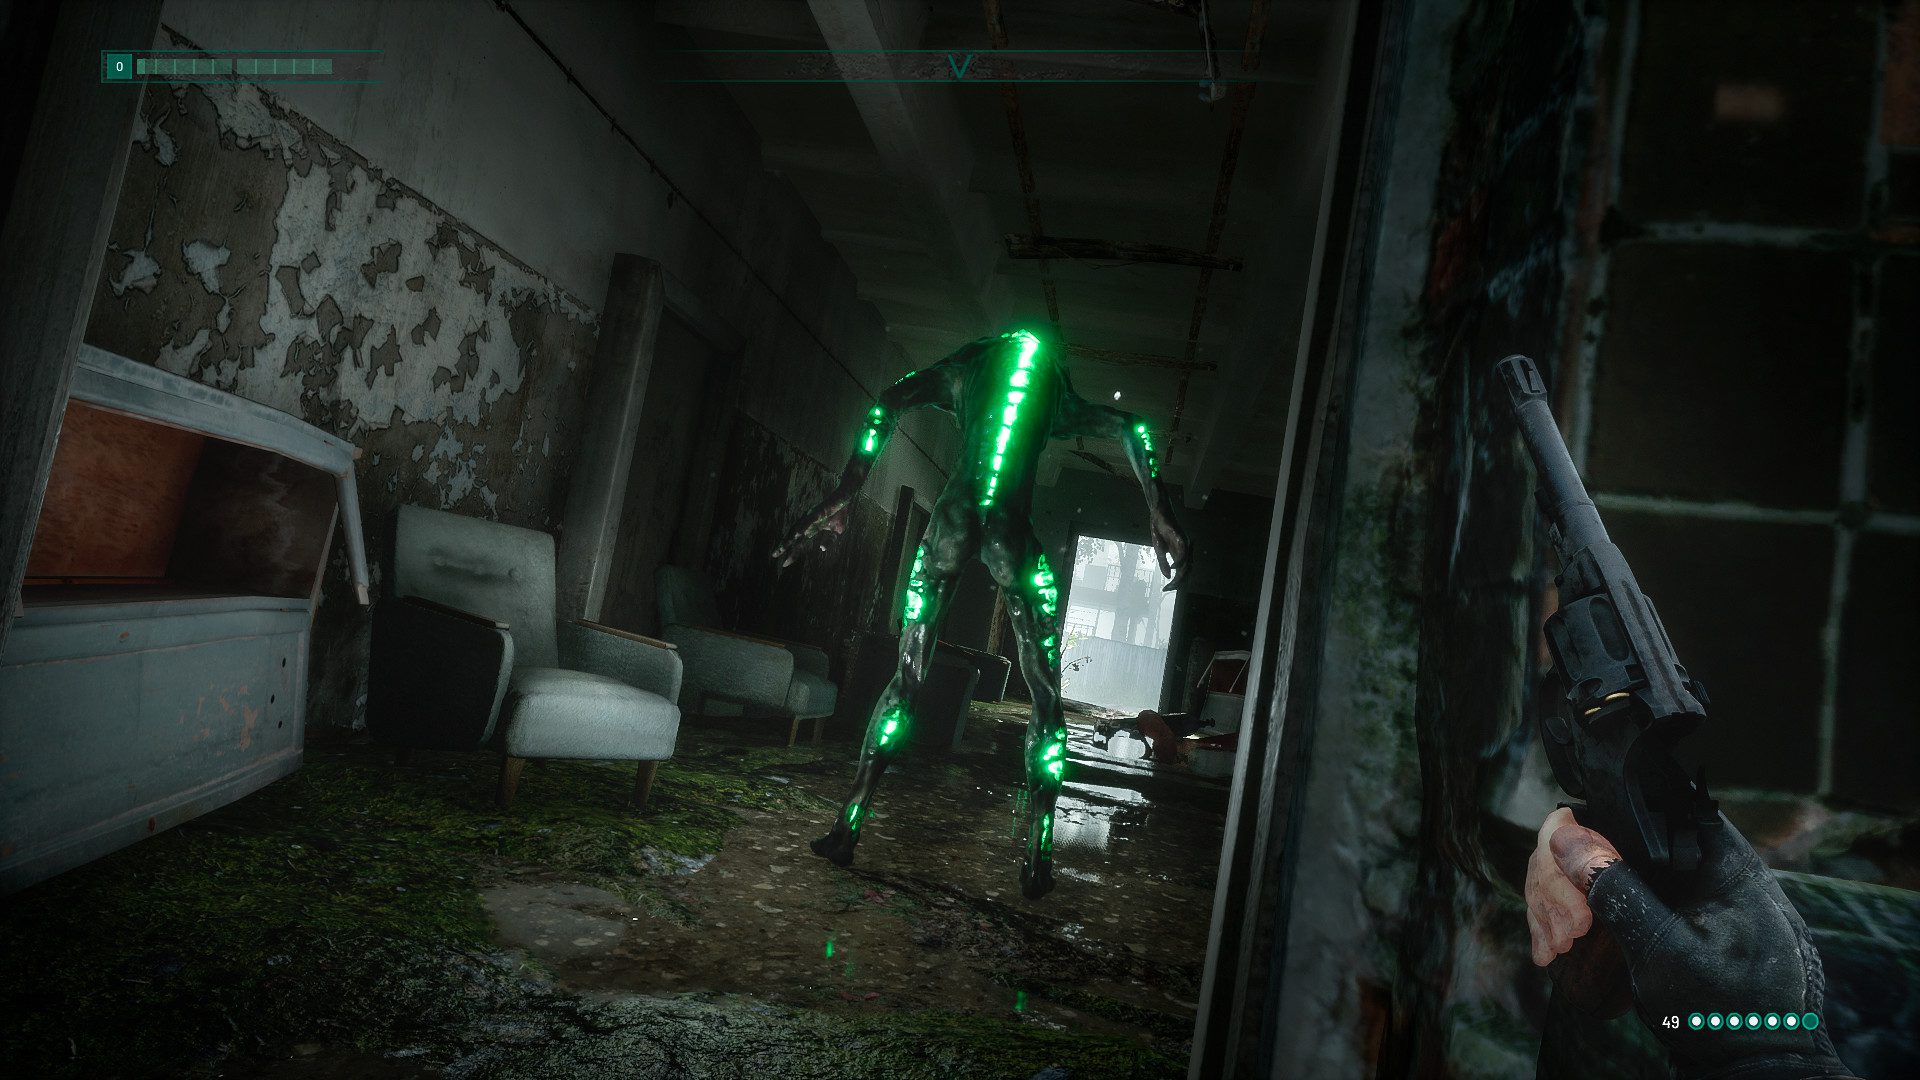 Sci-Fi Survival Horror RPG “Chernobylite” Launches This July